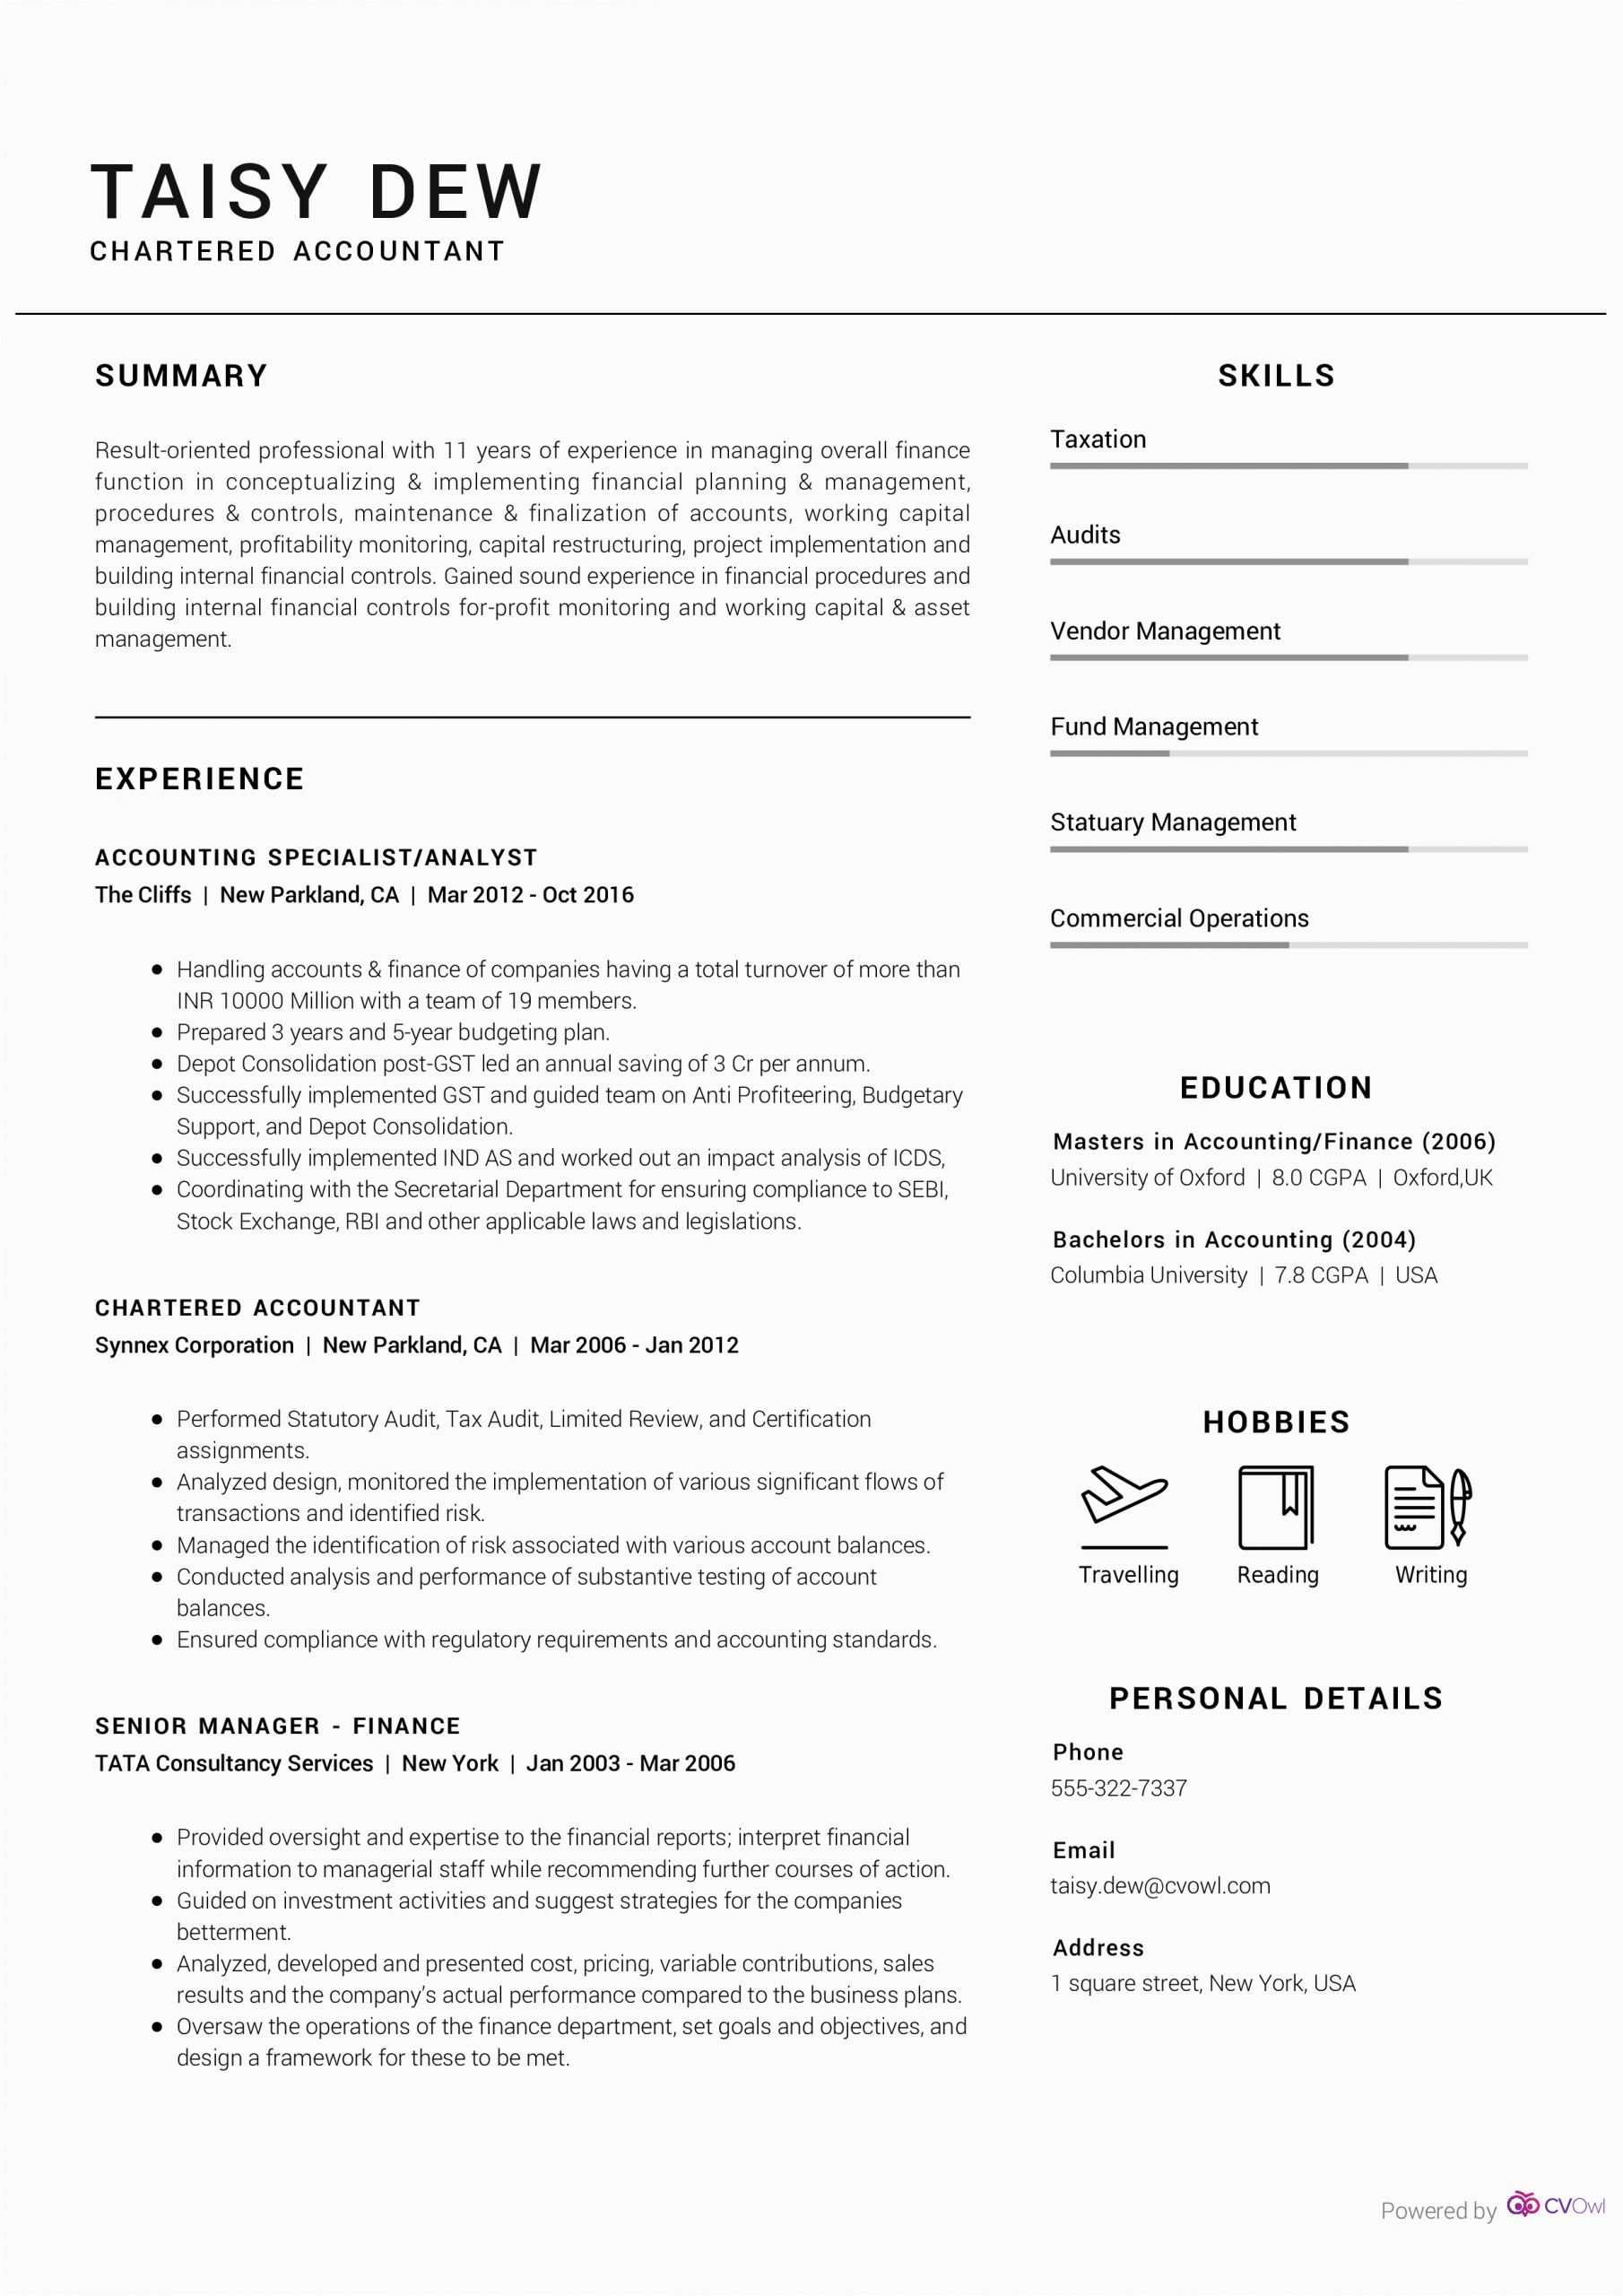 Sample Resume for Experienced Chartered Accountant Chartered Accountant Resume Sample